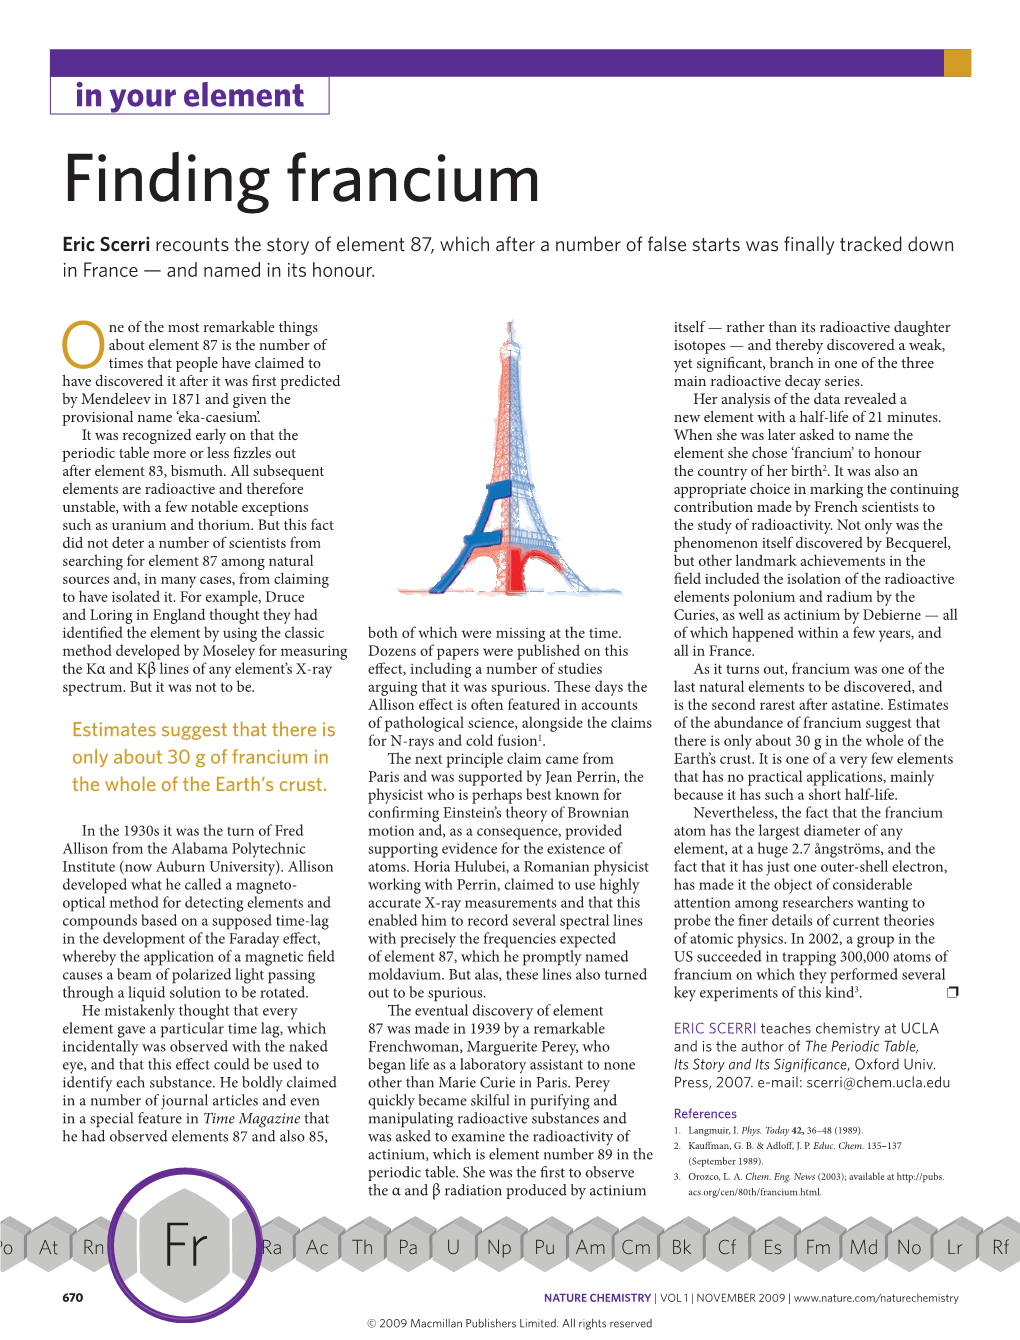 Finding Francium Eric Scerri Recounts the Story of Element 87, Which After a Number of False Starts Was Finally Tracked Down in France — and Named in Its Honour